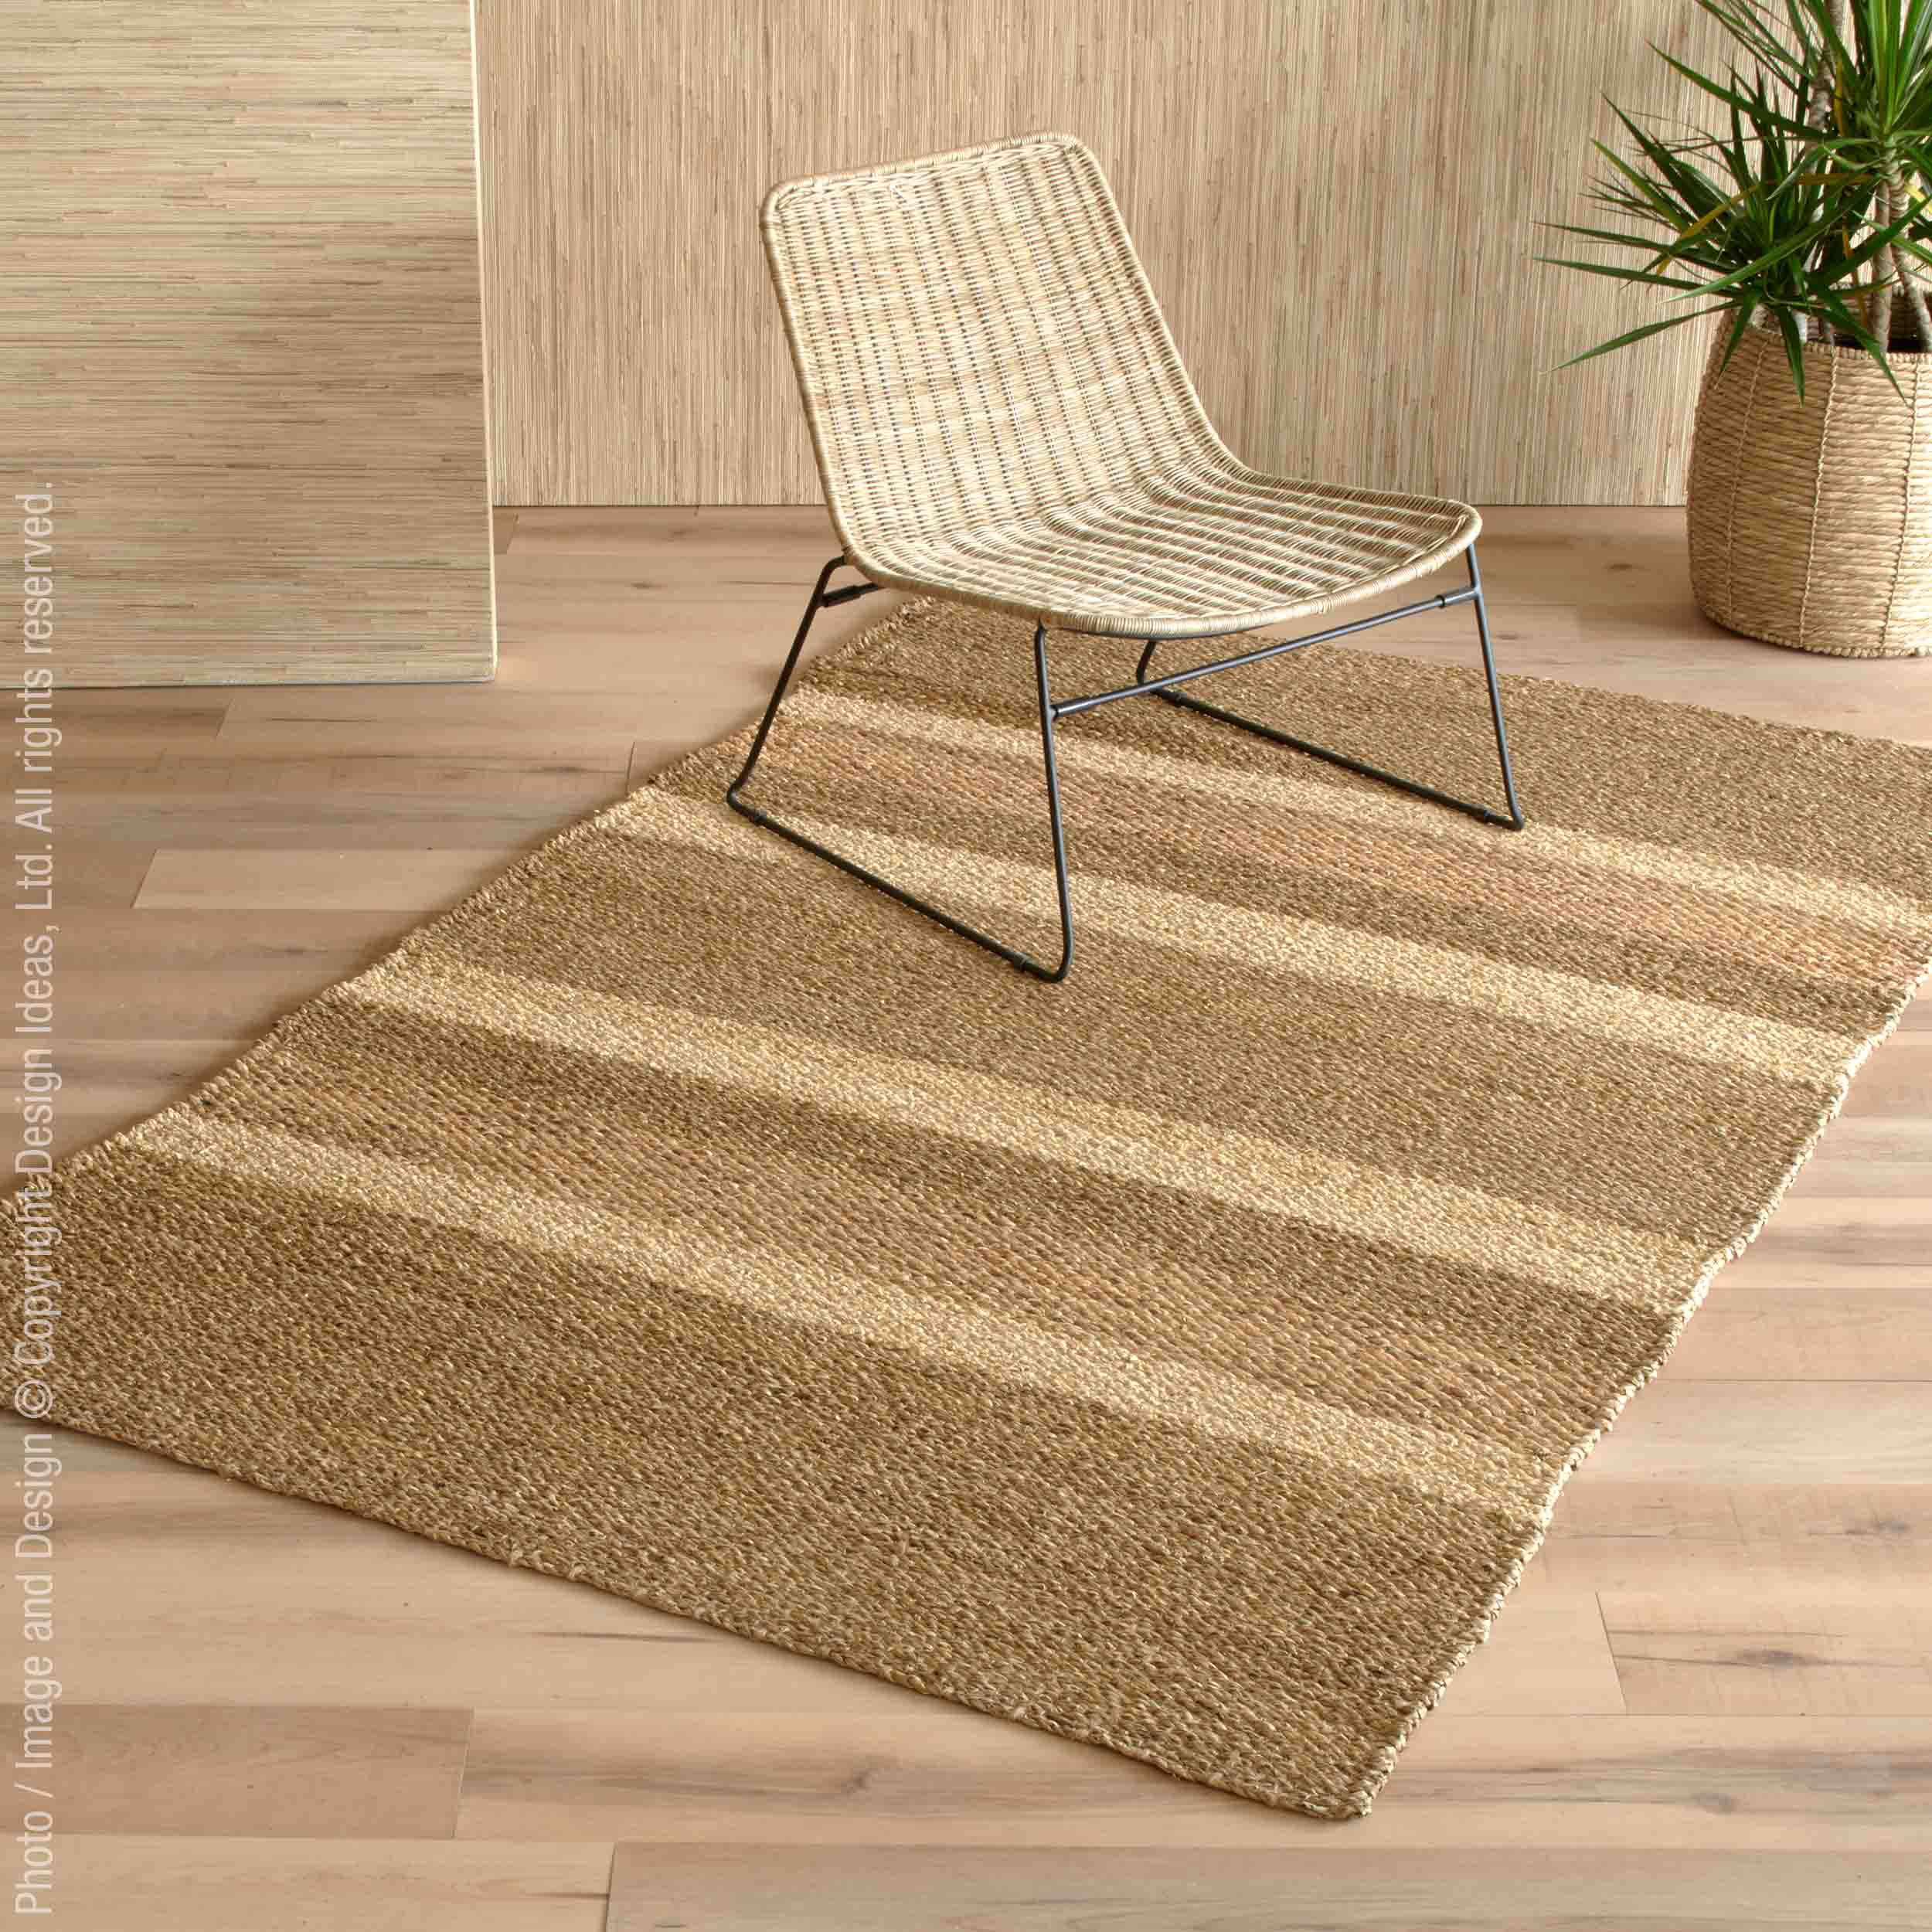 Barletta™ rug (60x96in.) - Natural | Image 1 | Premium Rug from the Barletta collection | made with Water Hyacinth Twine for long lasting use | texxture